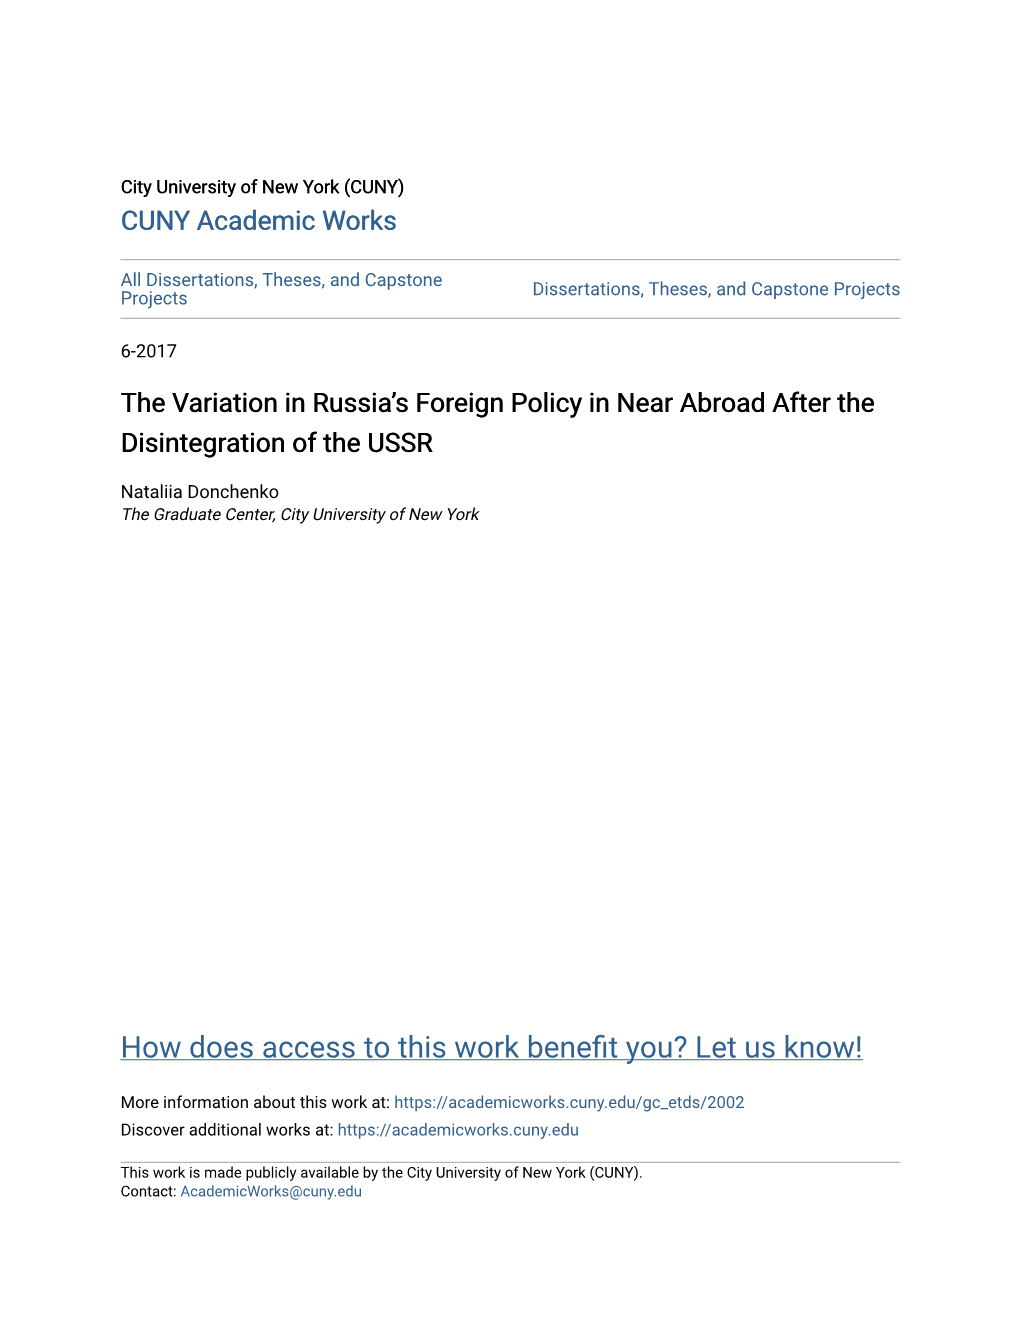 The Variation in Russia's Foreign Policy in Near Abroad After the Disintegration of the USSR